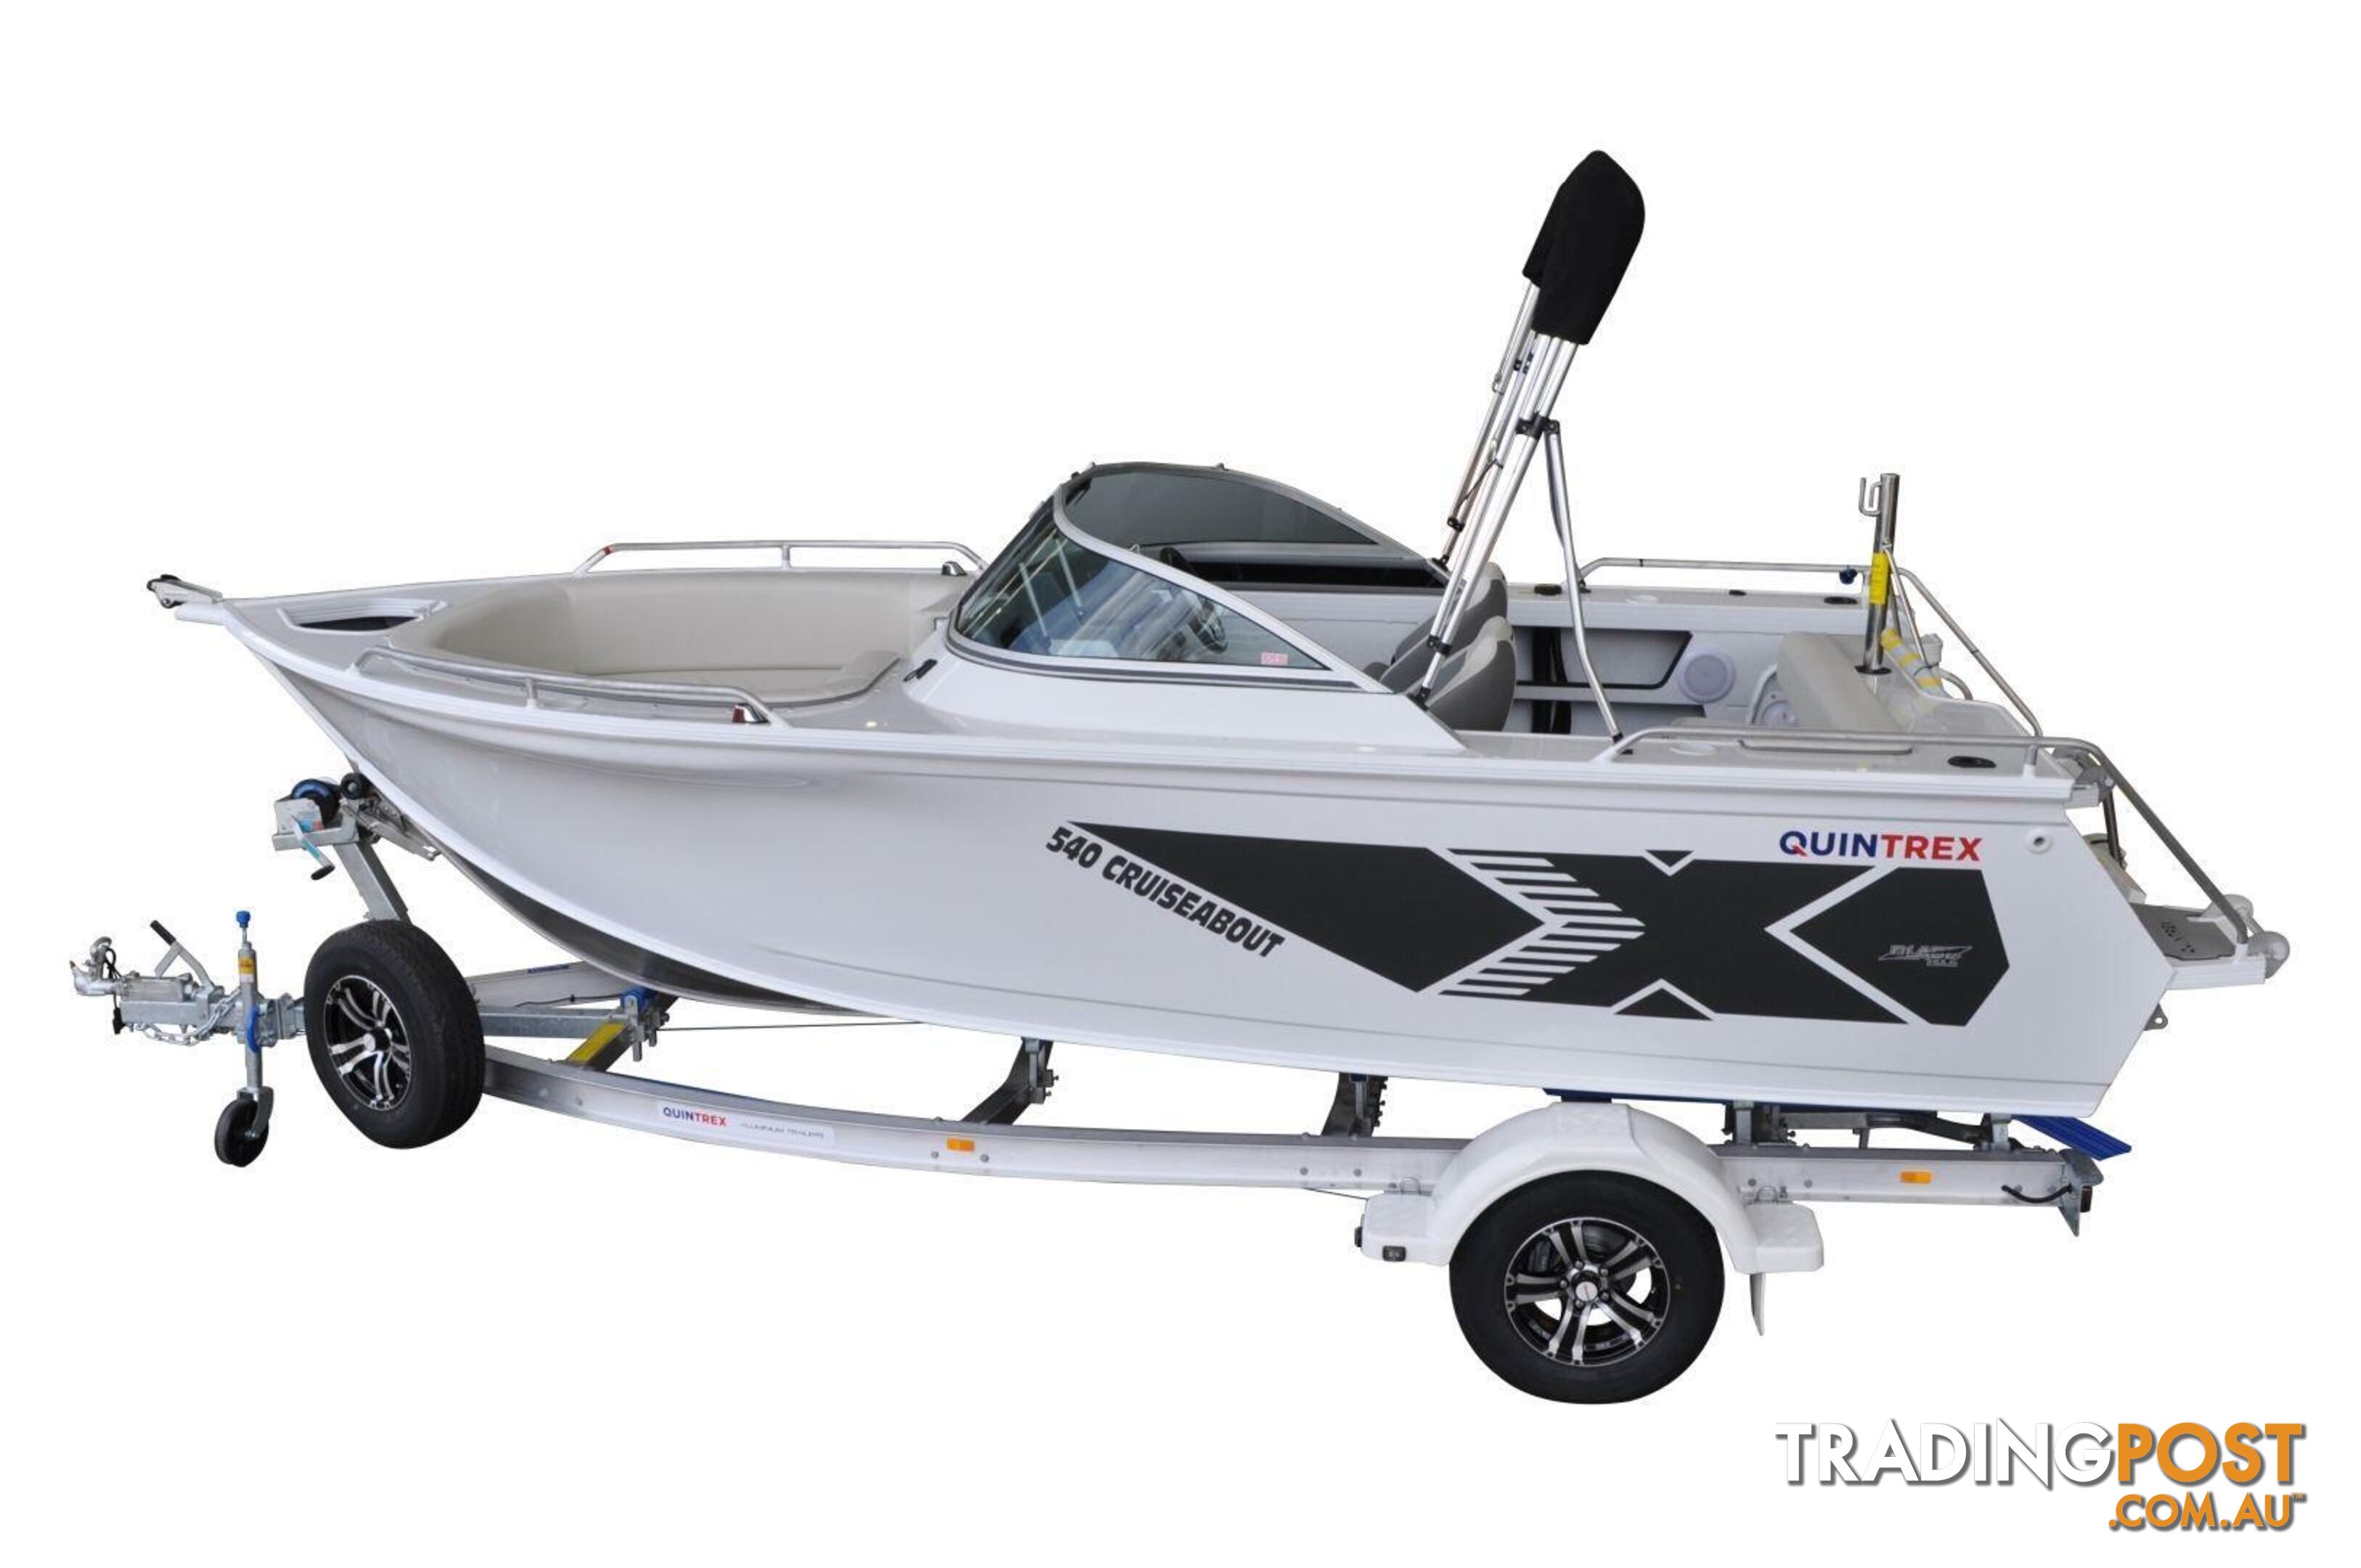 Quintrex 540 Cruiseabout + Yamaha F130hp 4-Stroke - Pack 3 for sale online prices